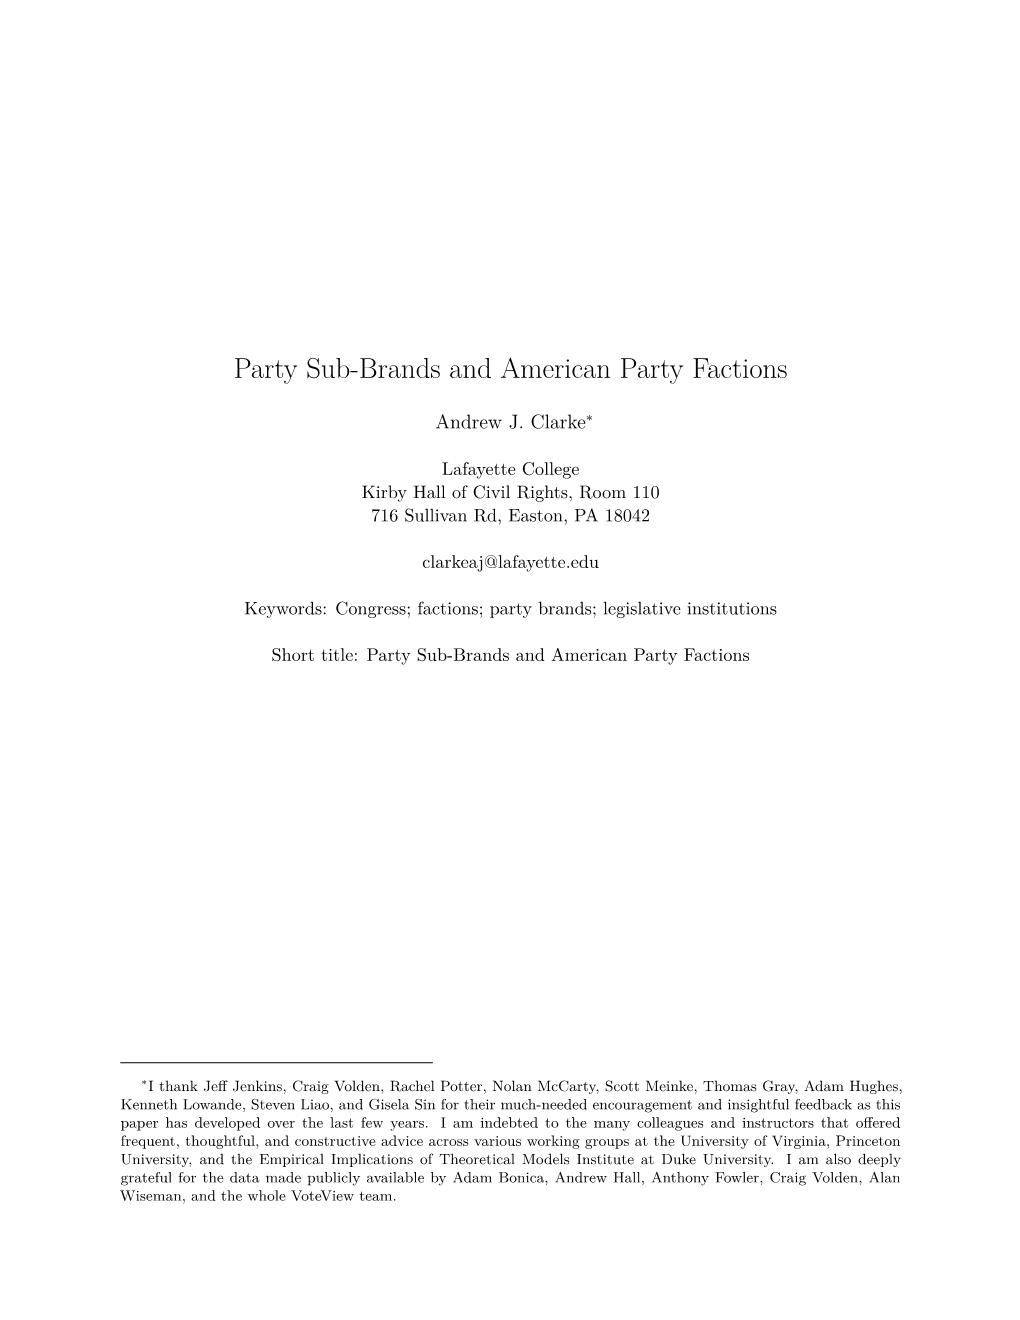 Party Sub-Brands and American Party Factions